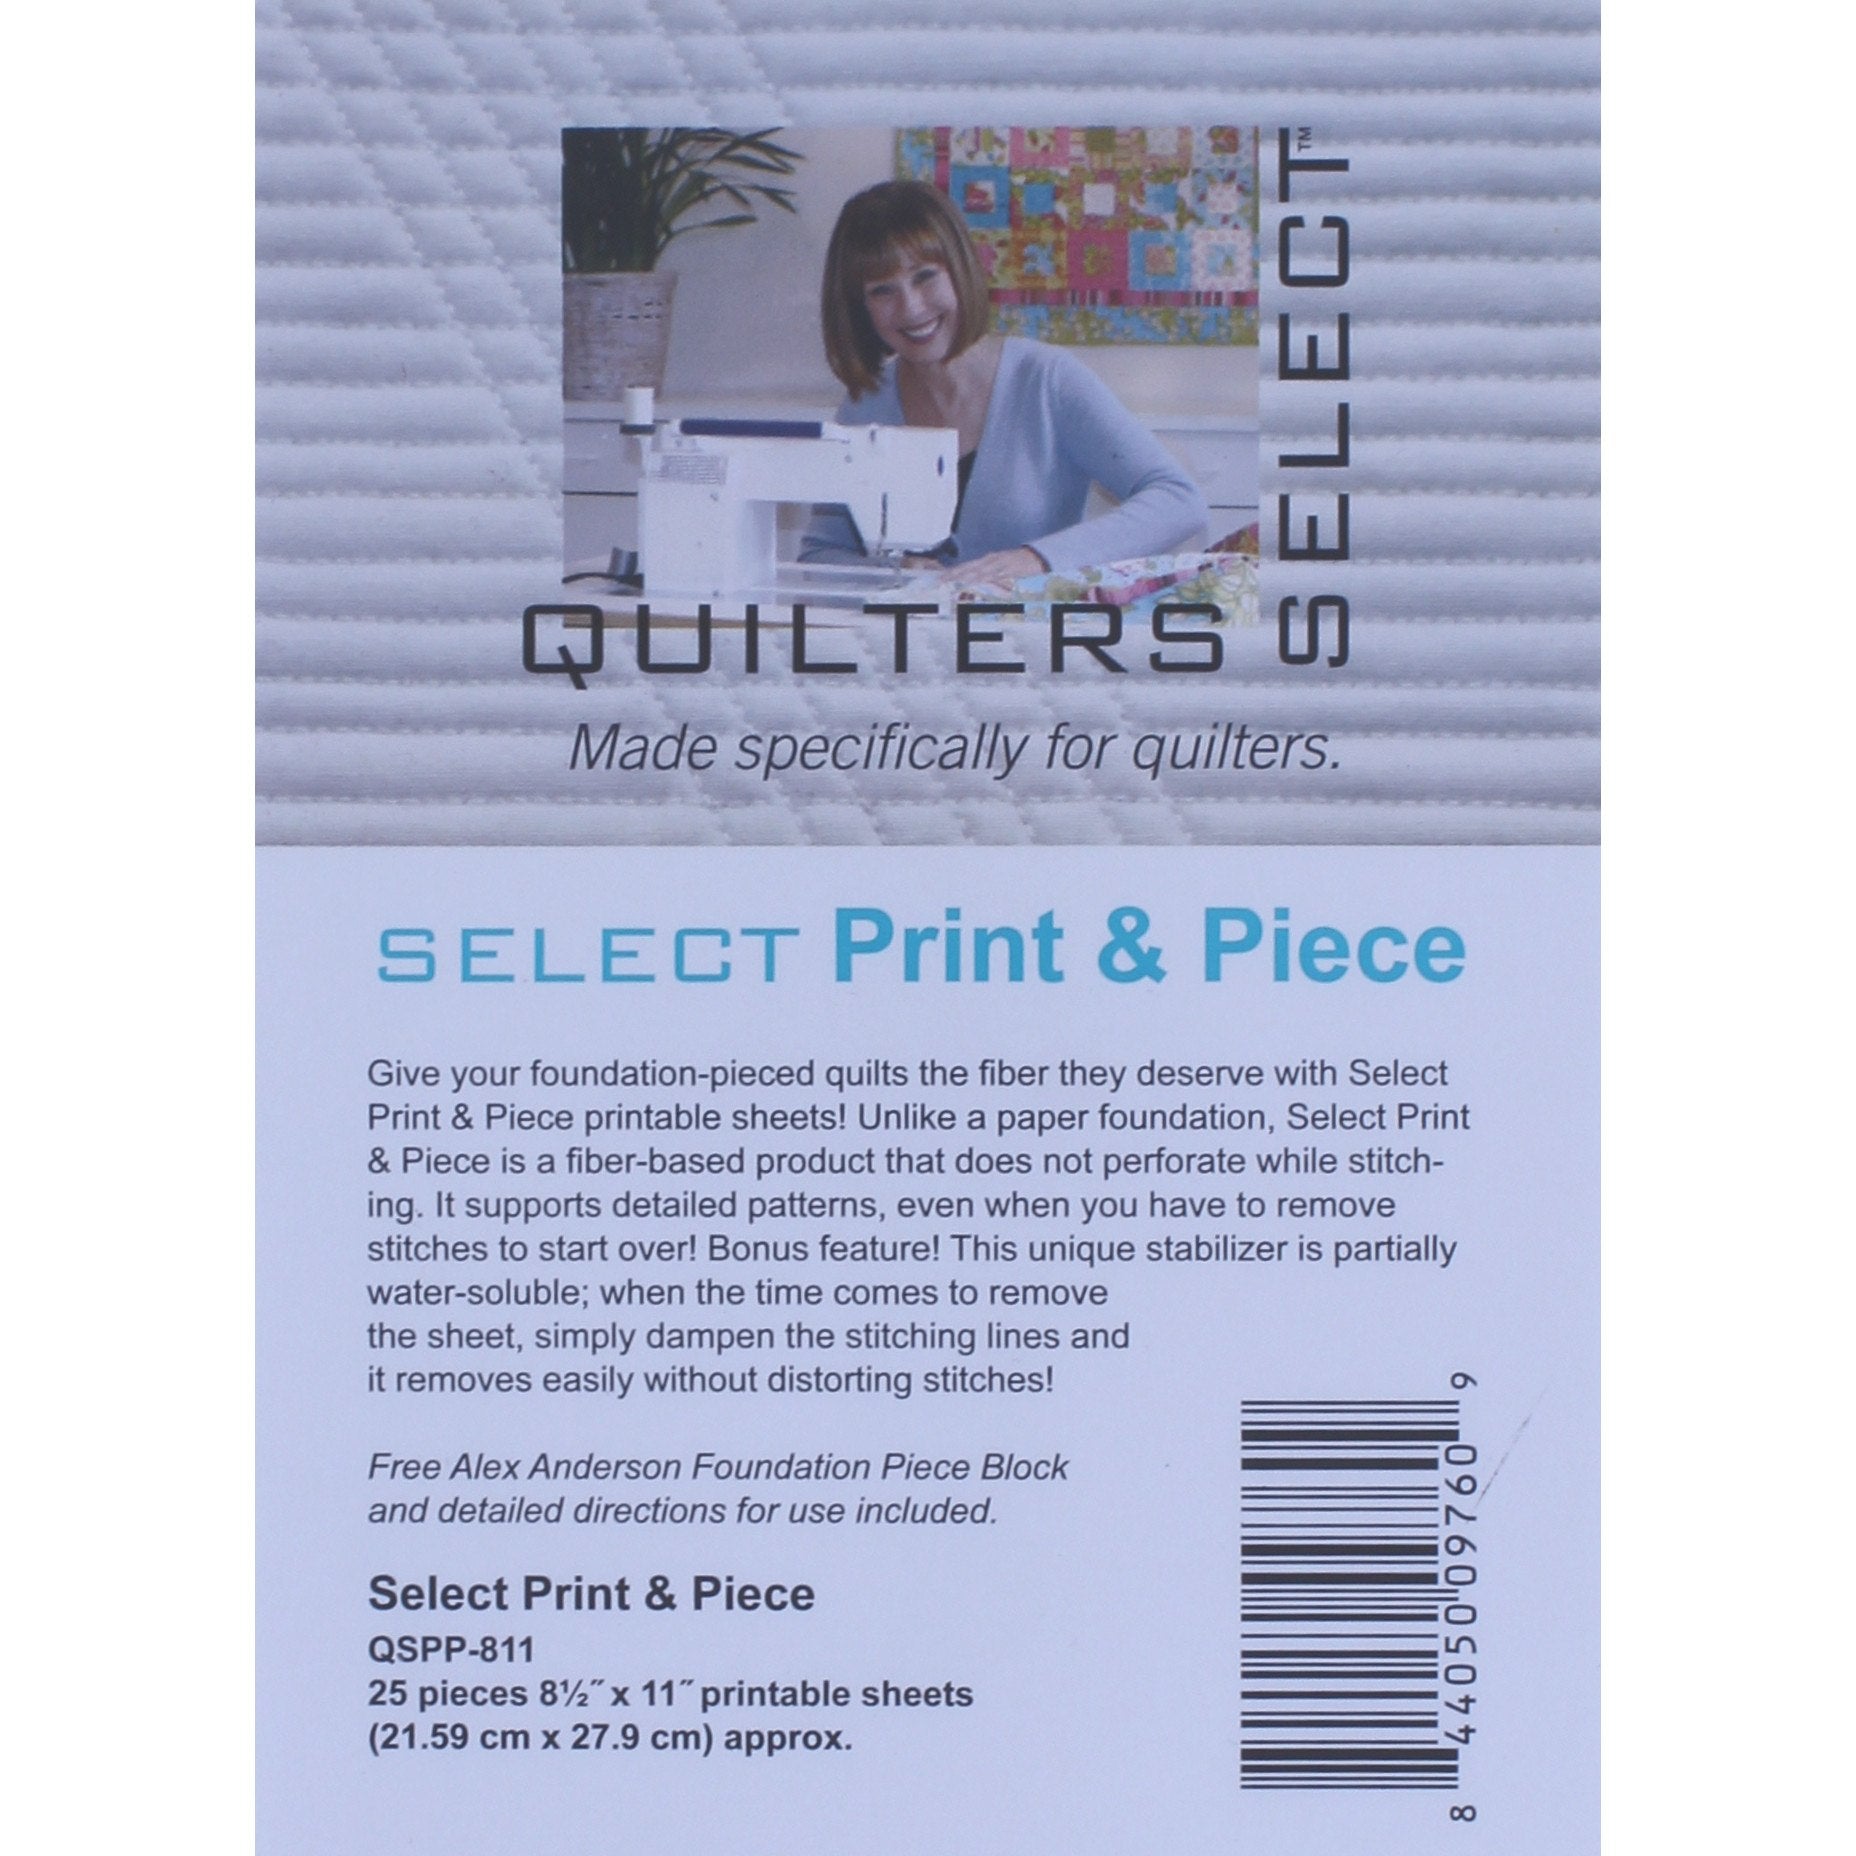 Quilters Select Print & Piece Sheets - 25pk - 8.5inx11in image # 57061